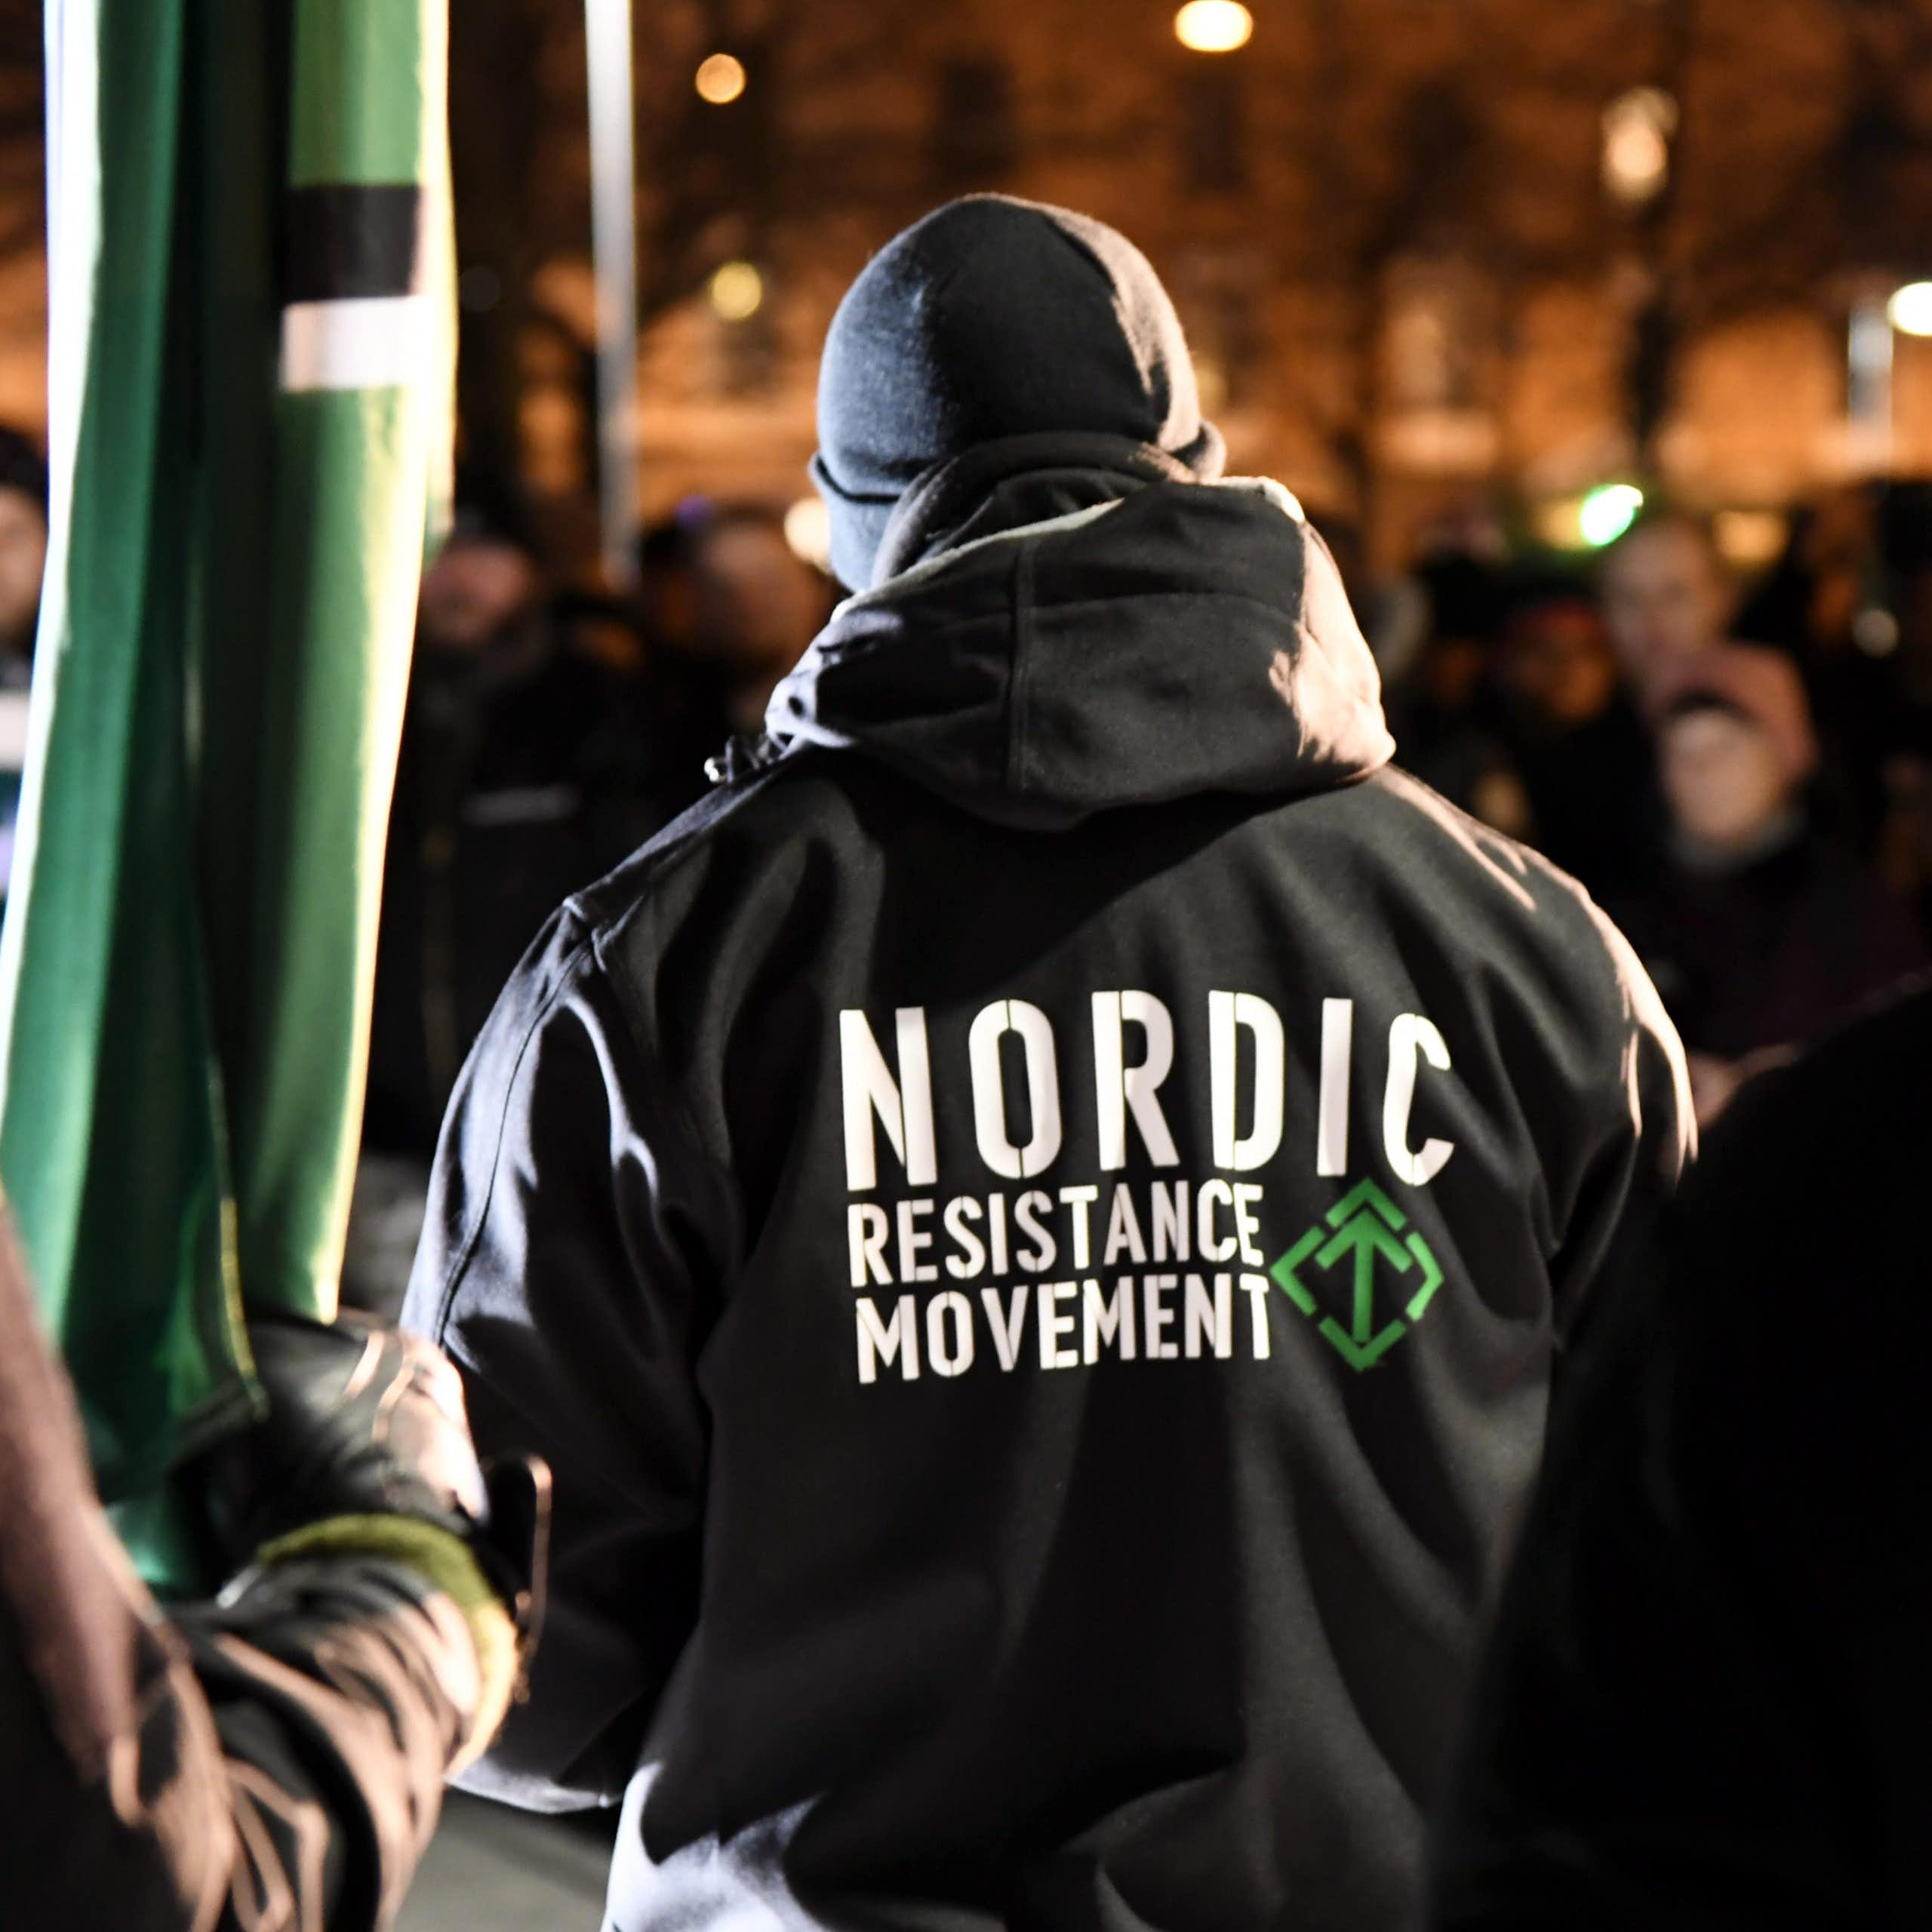 A man is seen from behind wearing a black jacket that reads "Nordic Resistance Movement."